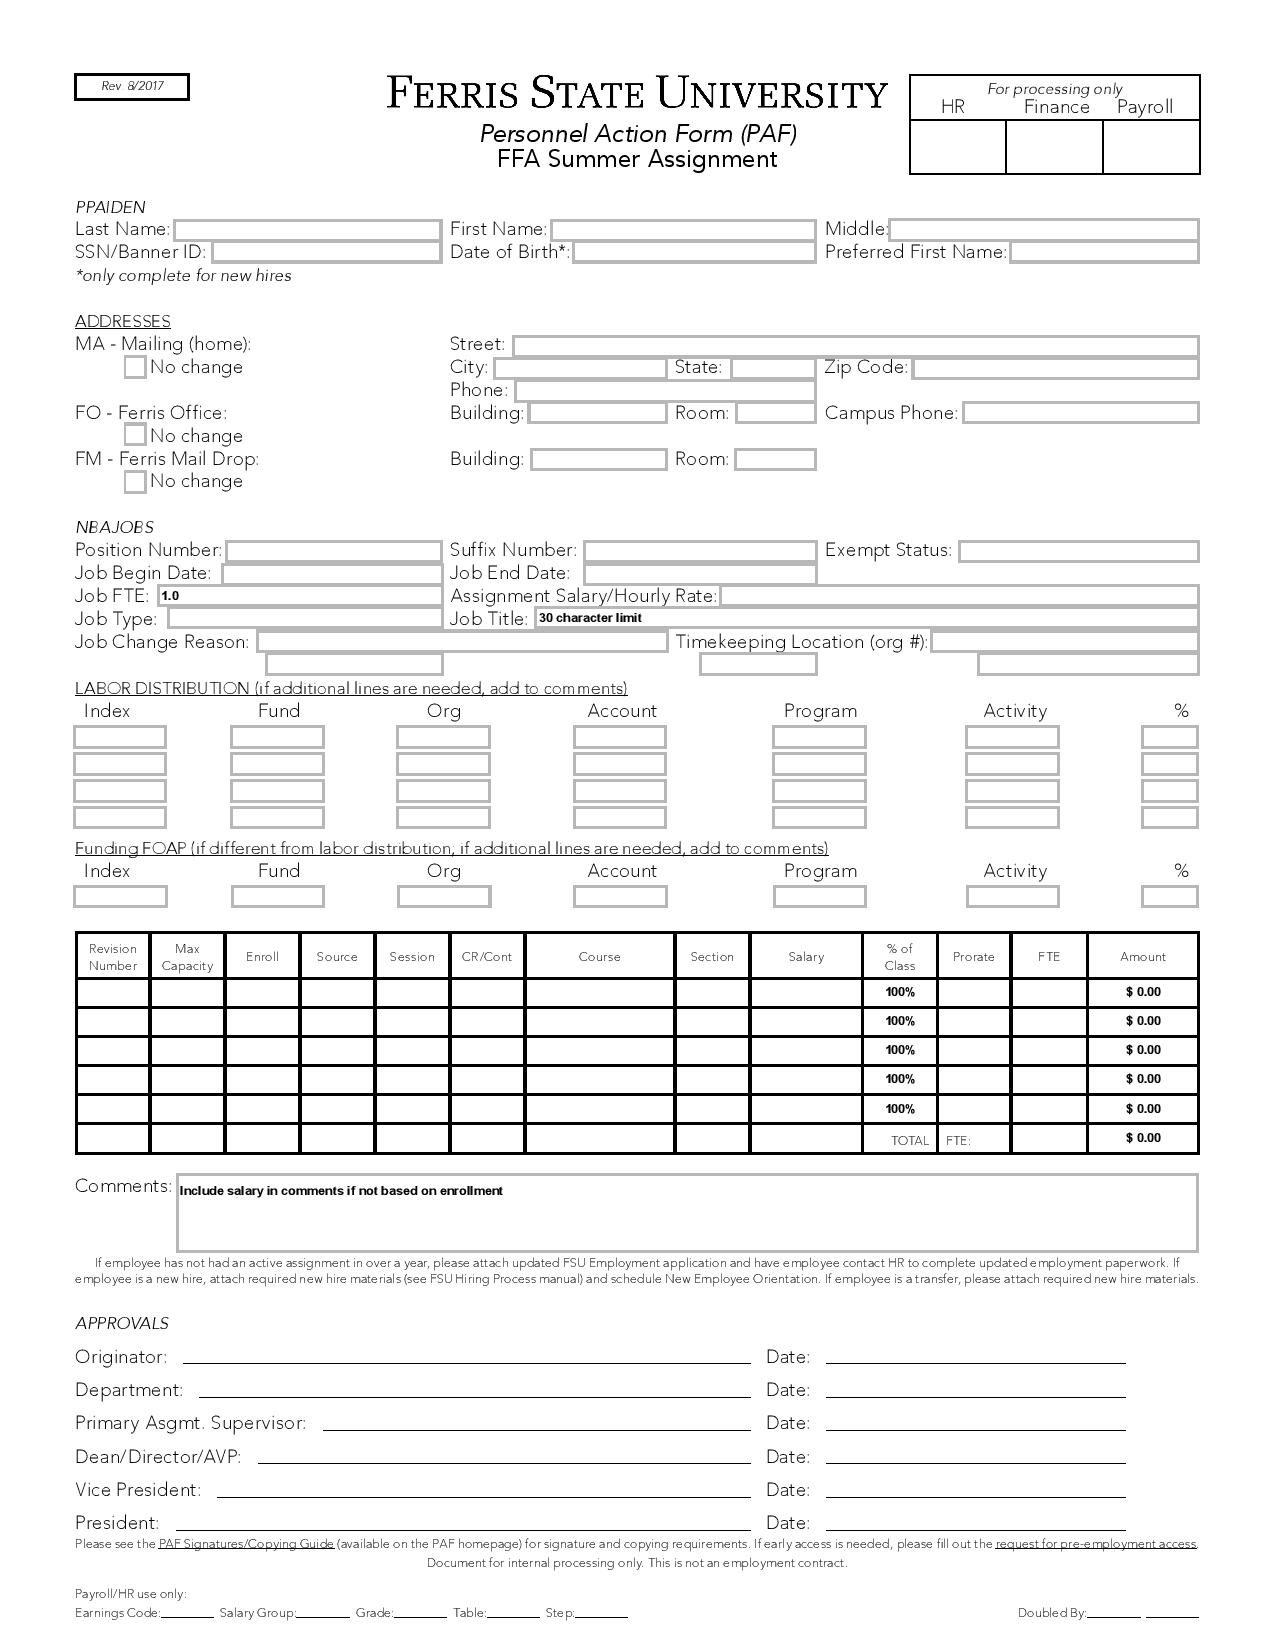 personnel action form summer assignment page 001